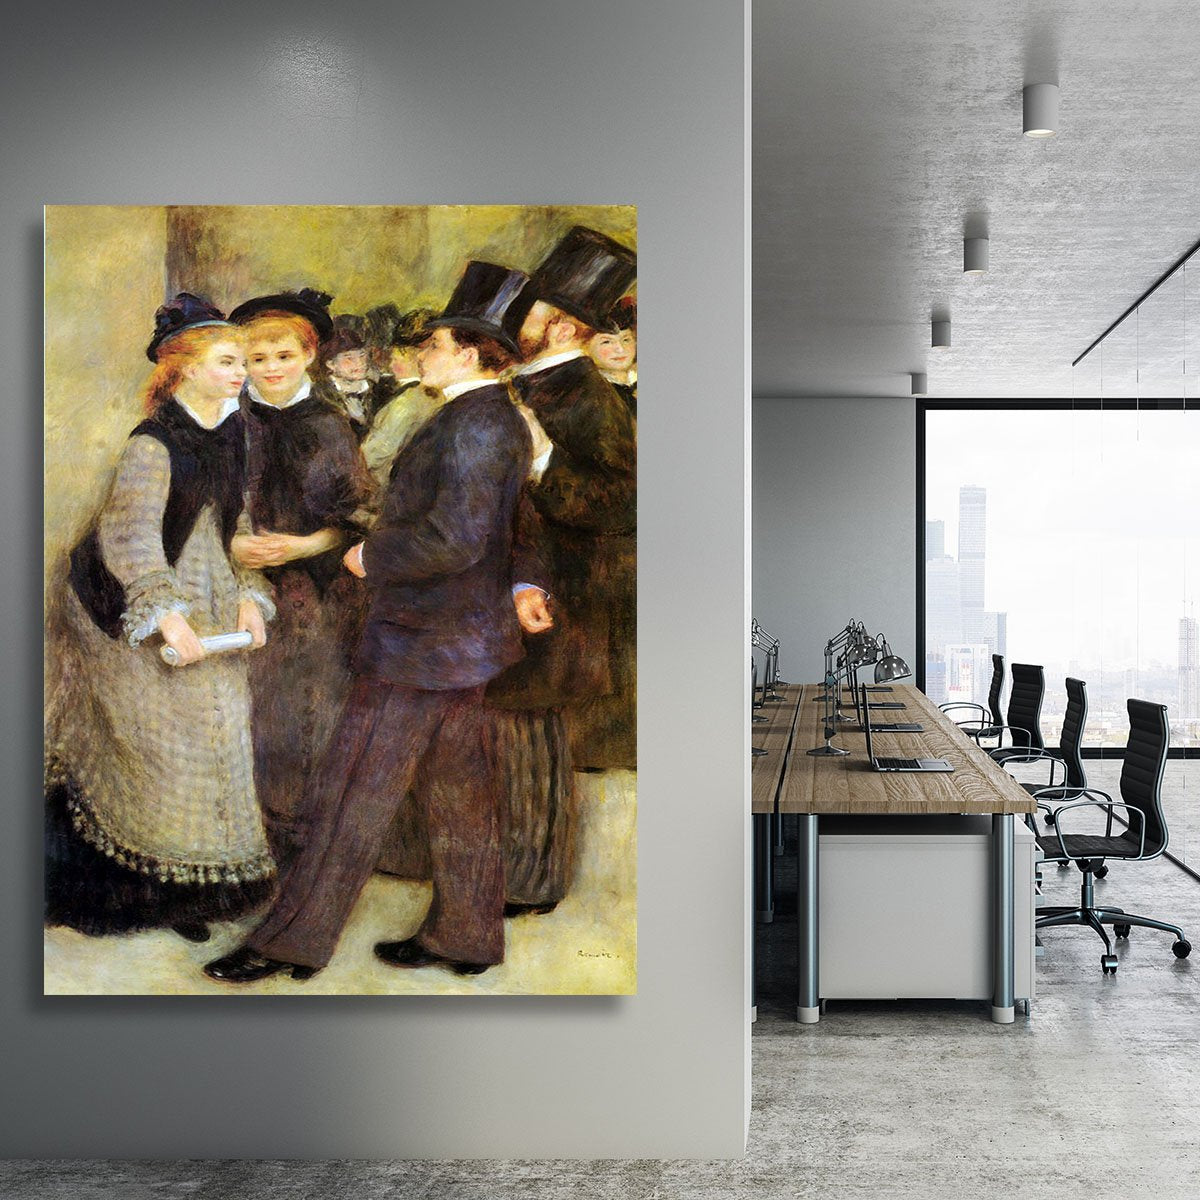 Leaving The Conservatoire by Renoir Canvas Print or Poster